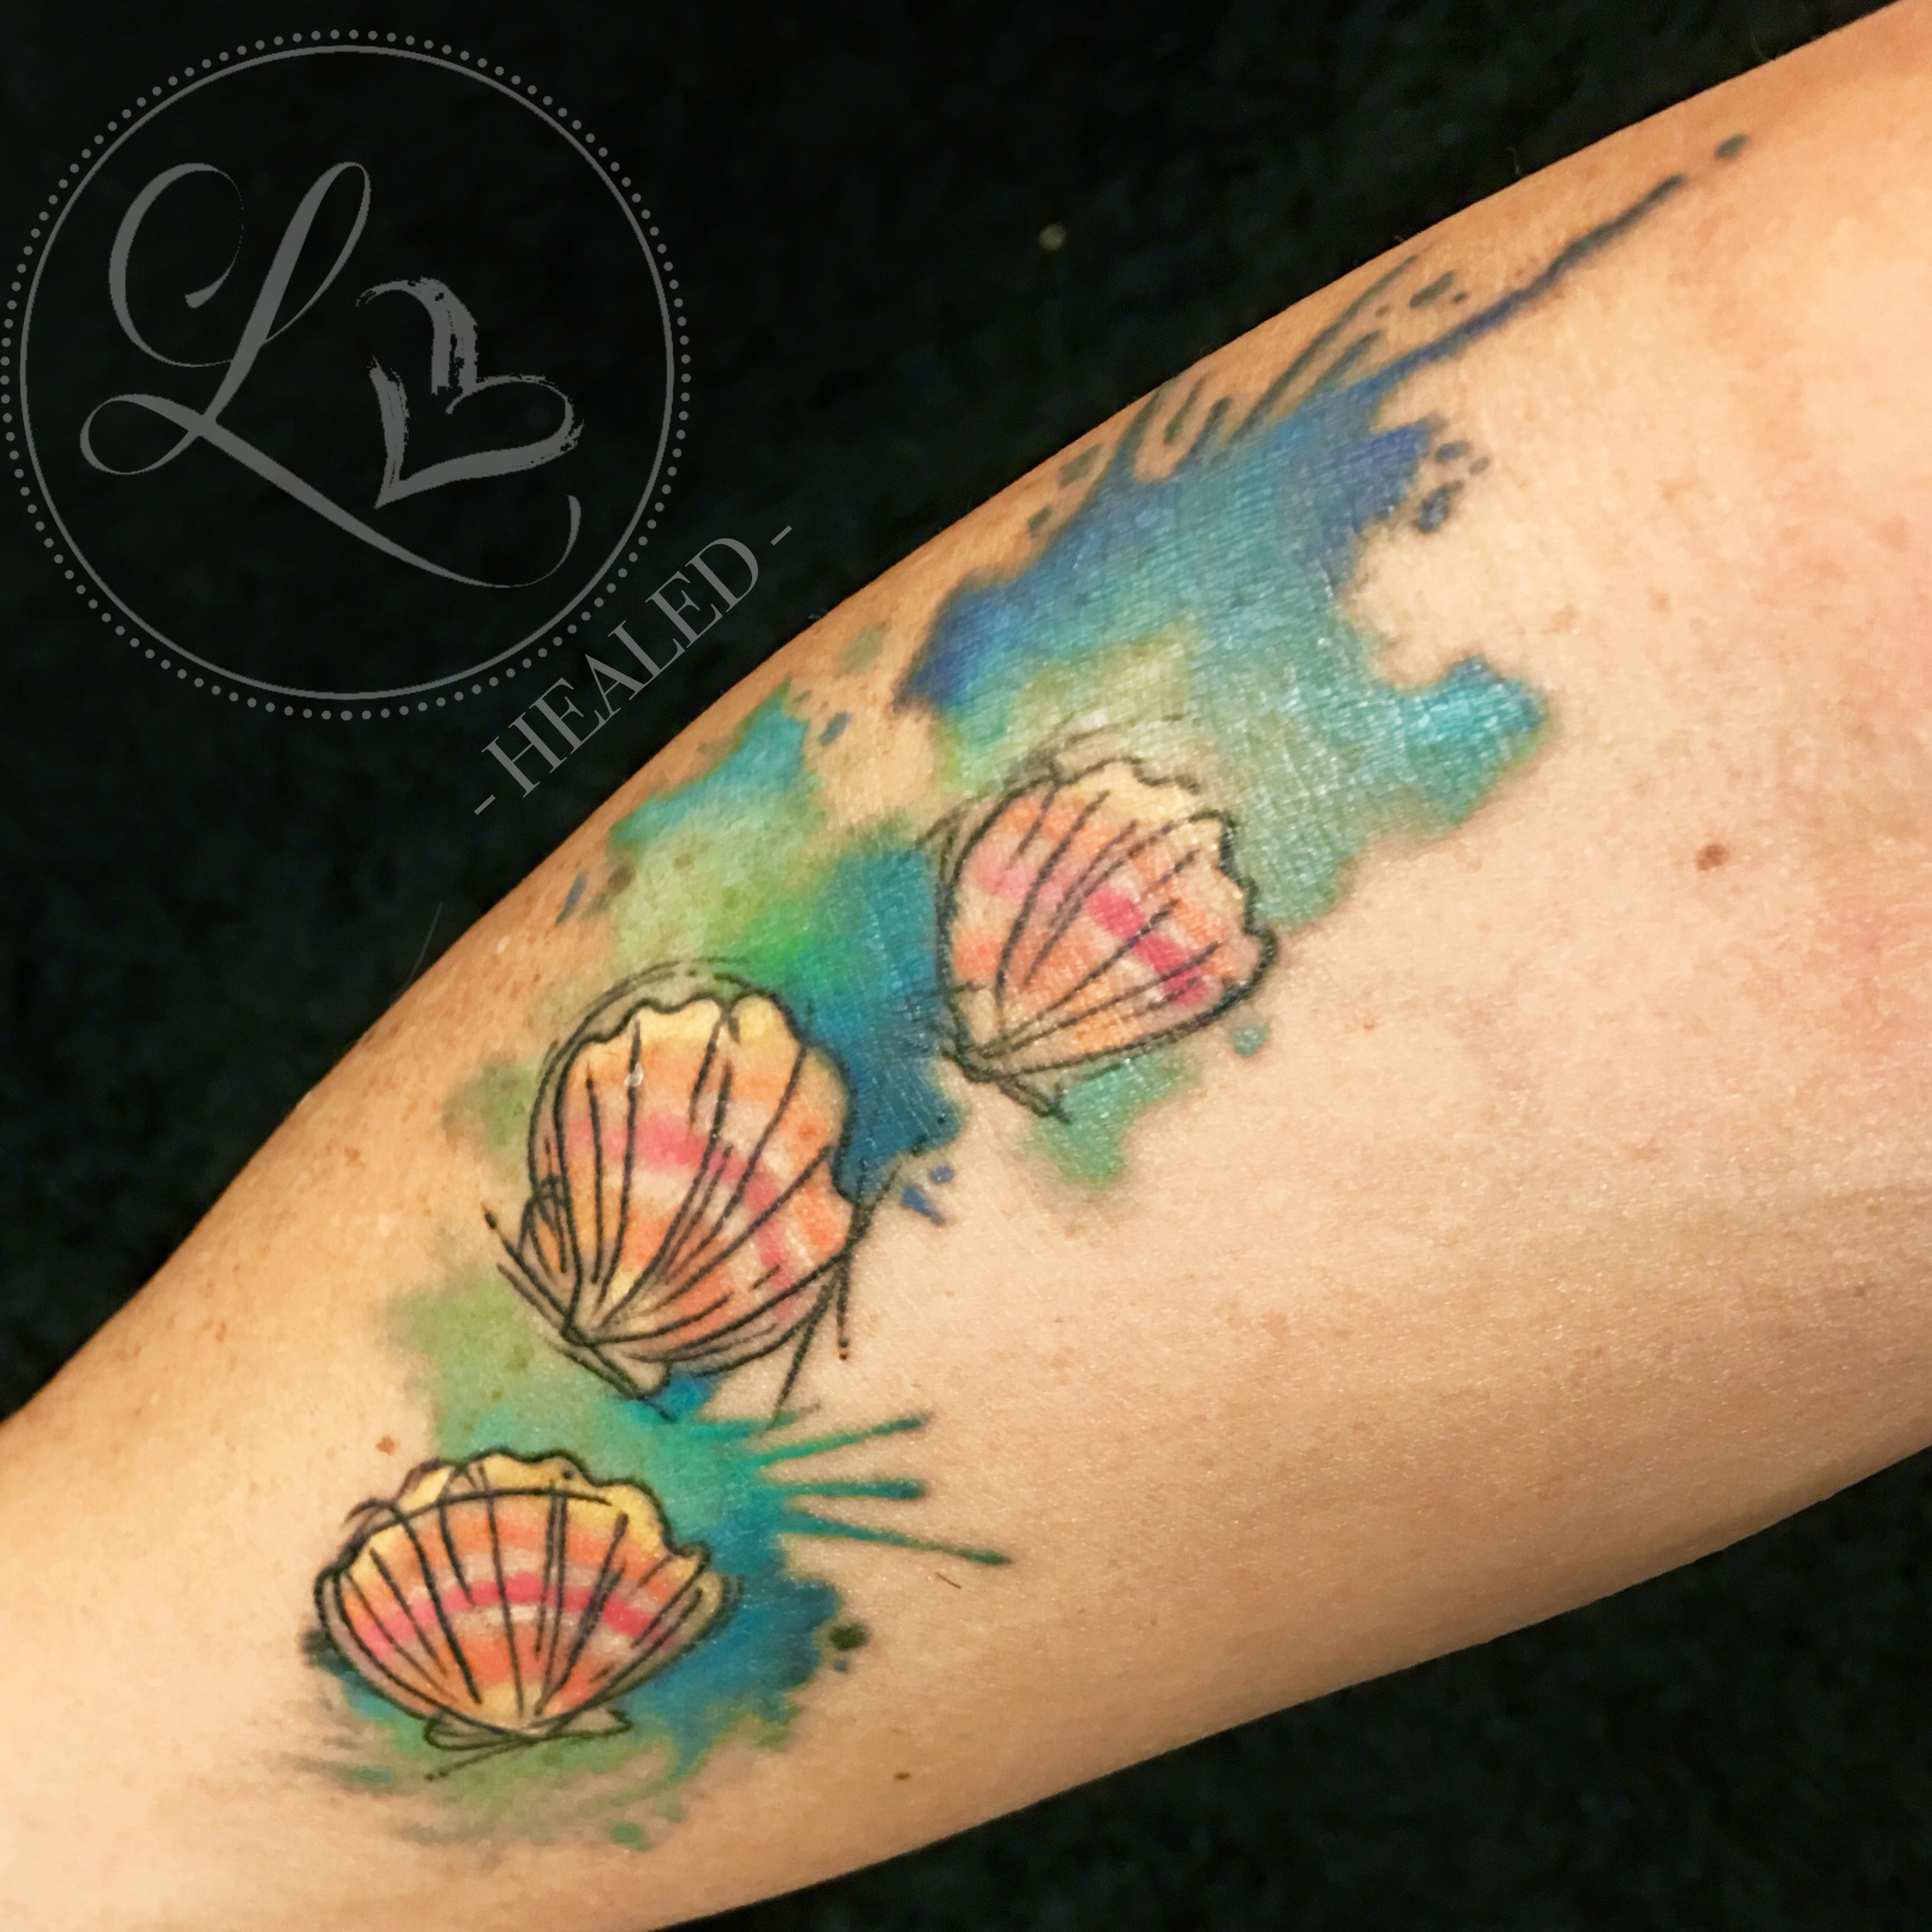 Healed tattoo of sunrise shells in watercolor style